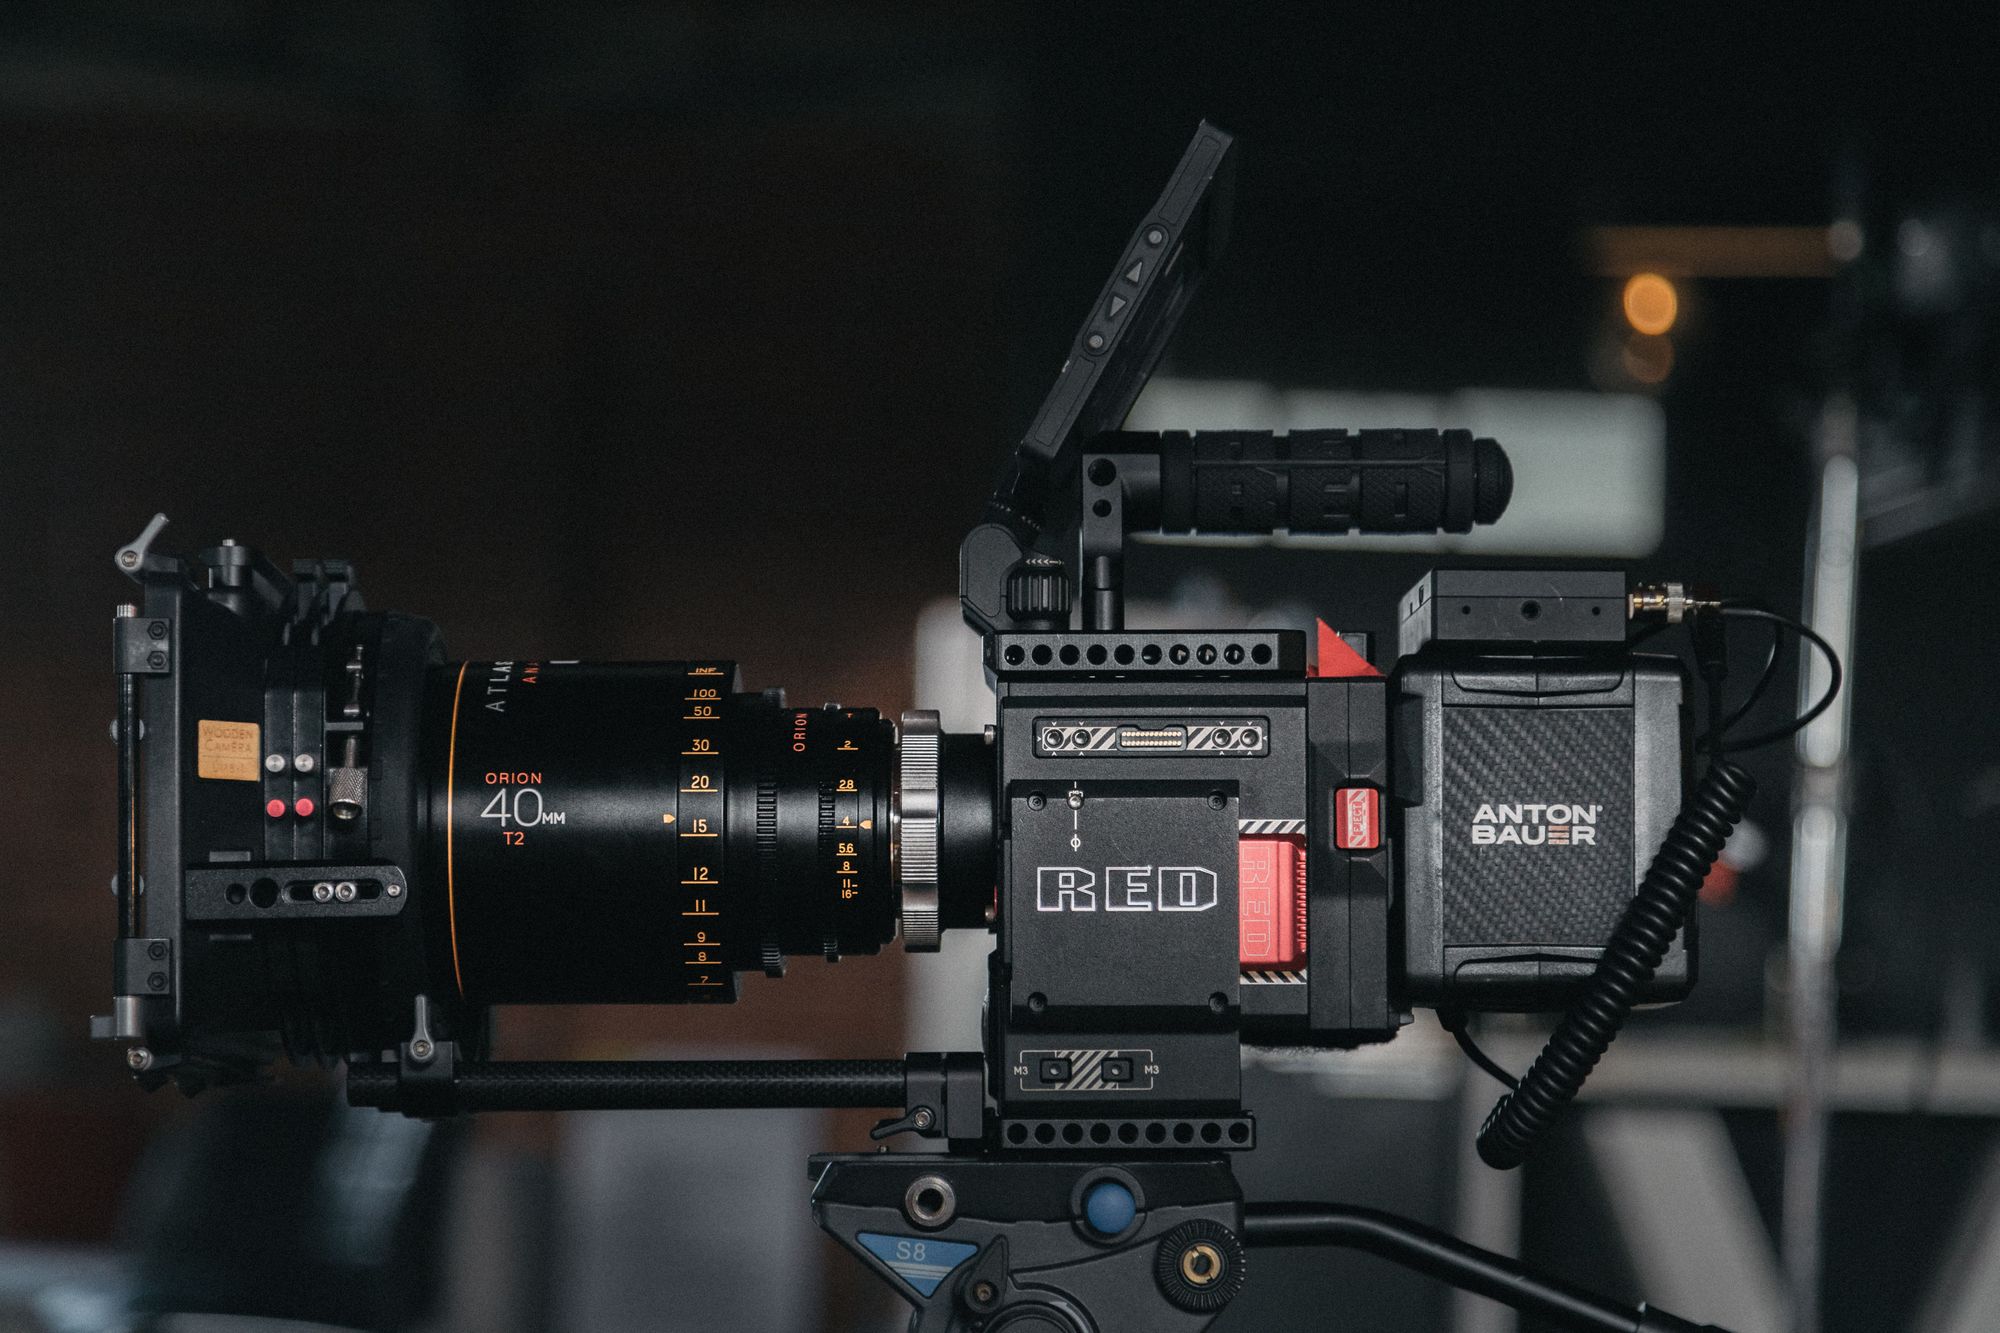 RED camera product history